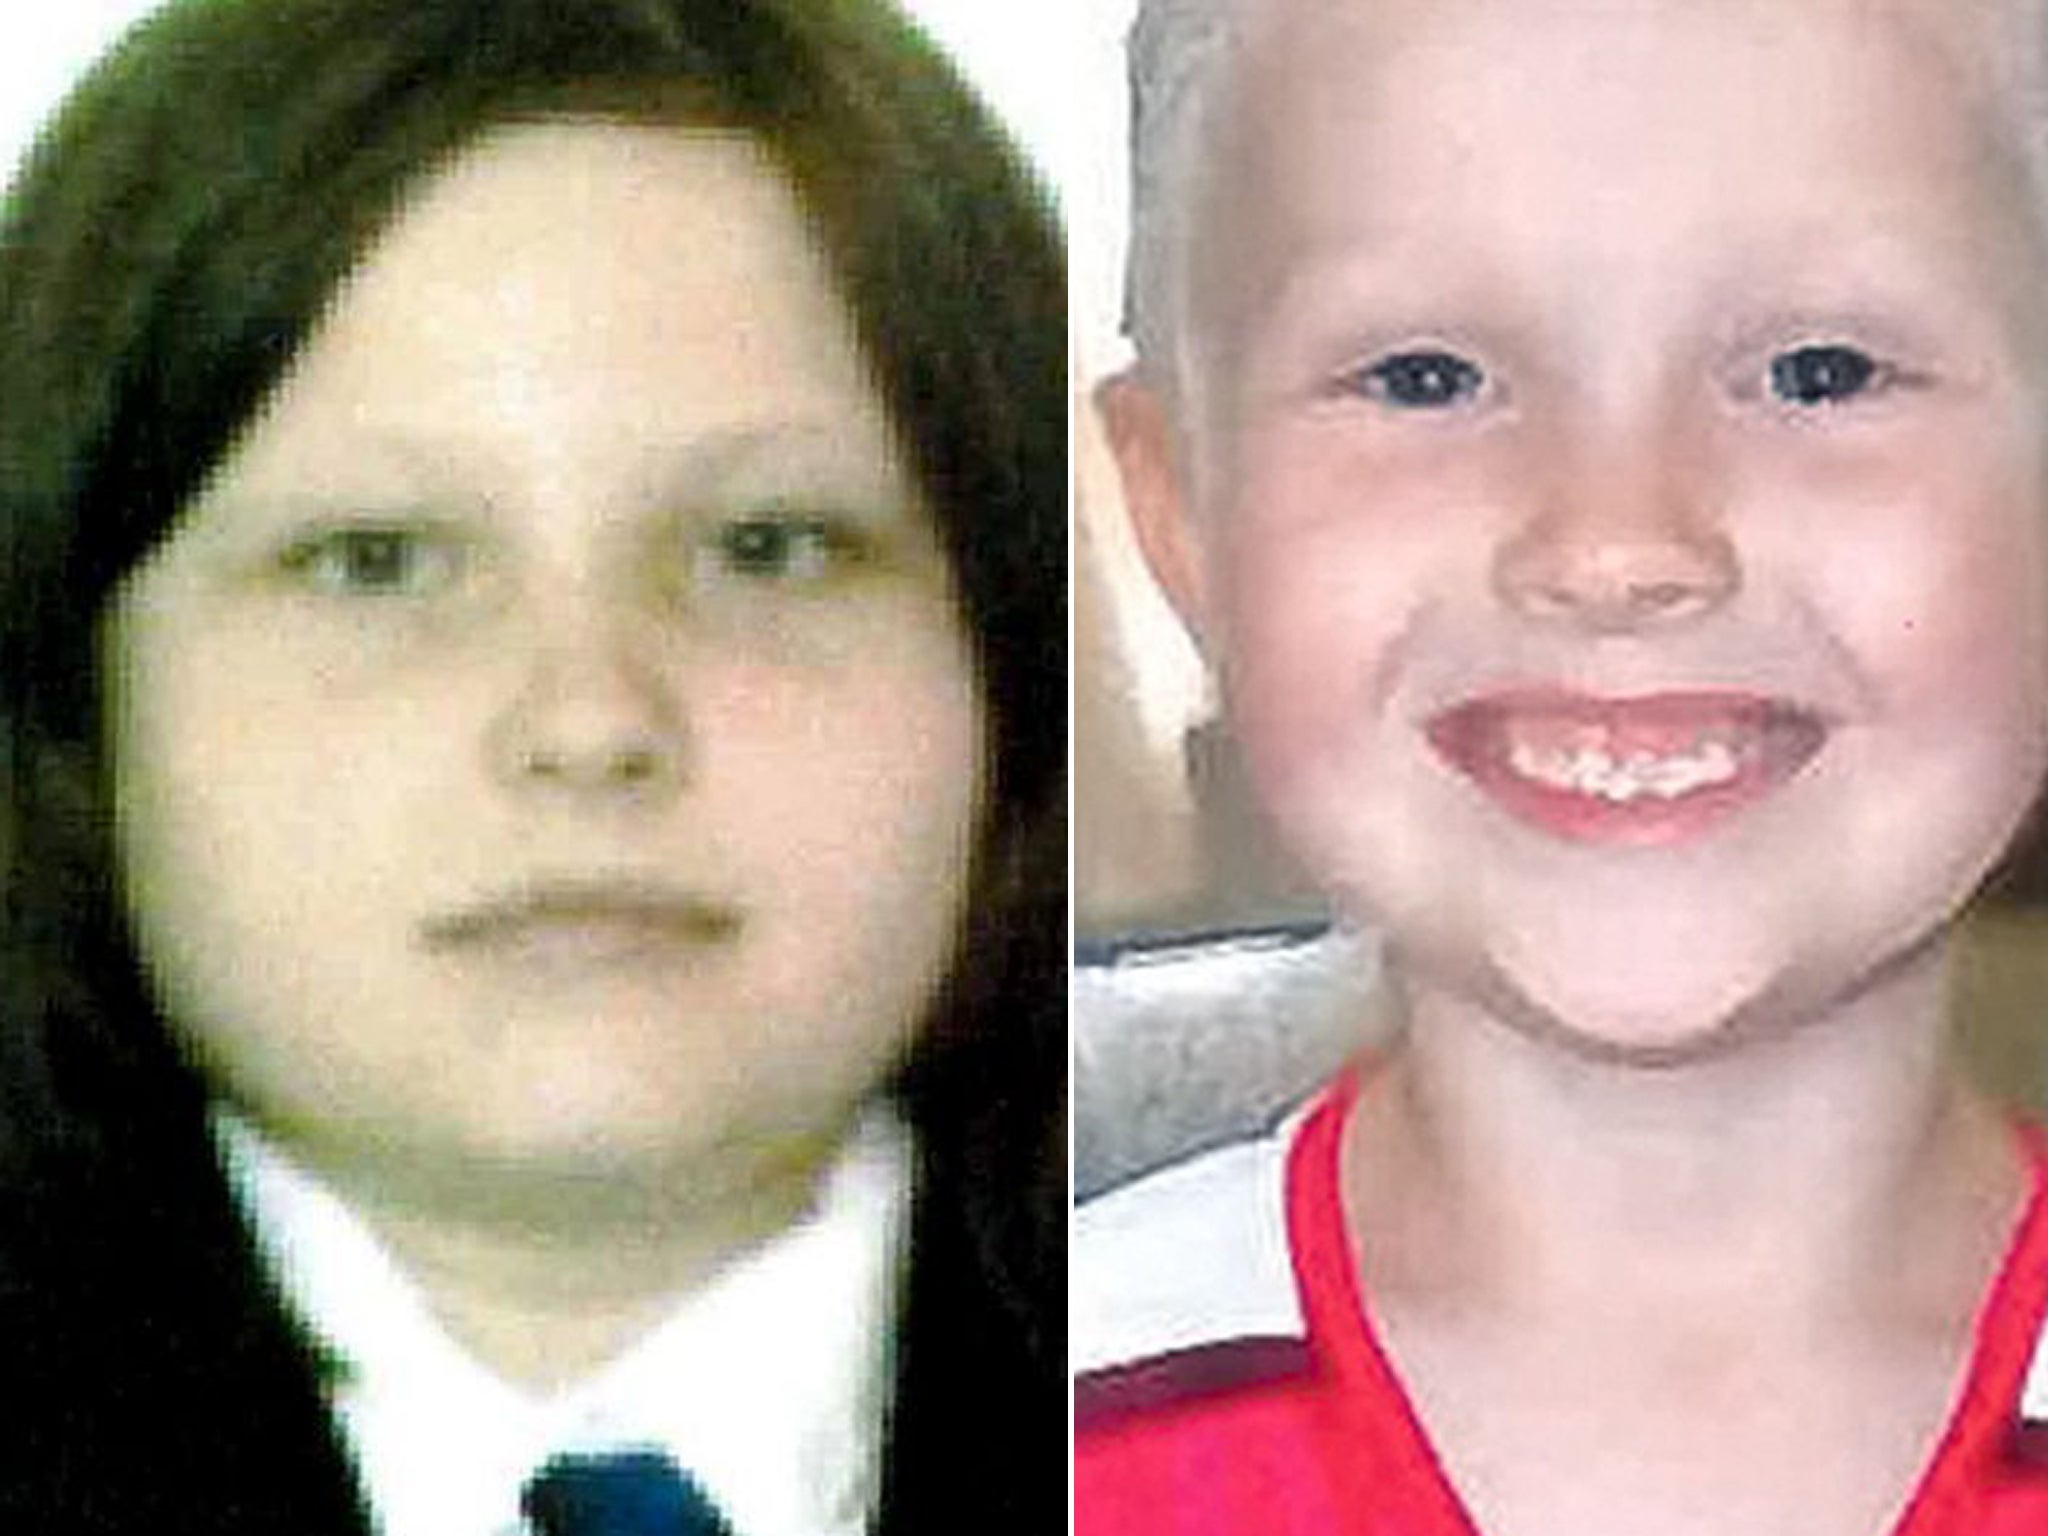 Sophie Fletcher, 12, and her 10-year-old brother Jack are believed to have left their home in Darlaston, West Midlands, either overnight or early this morning